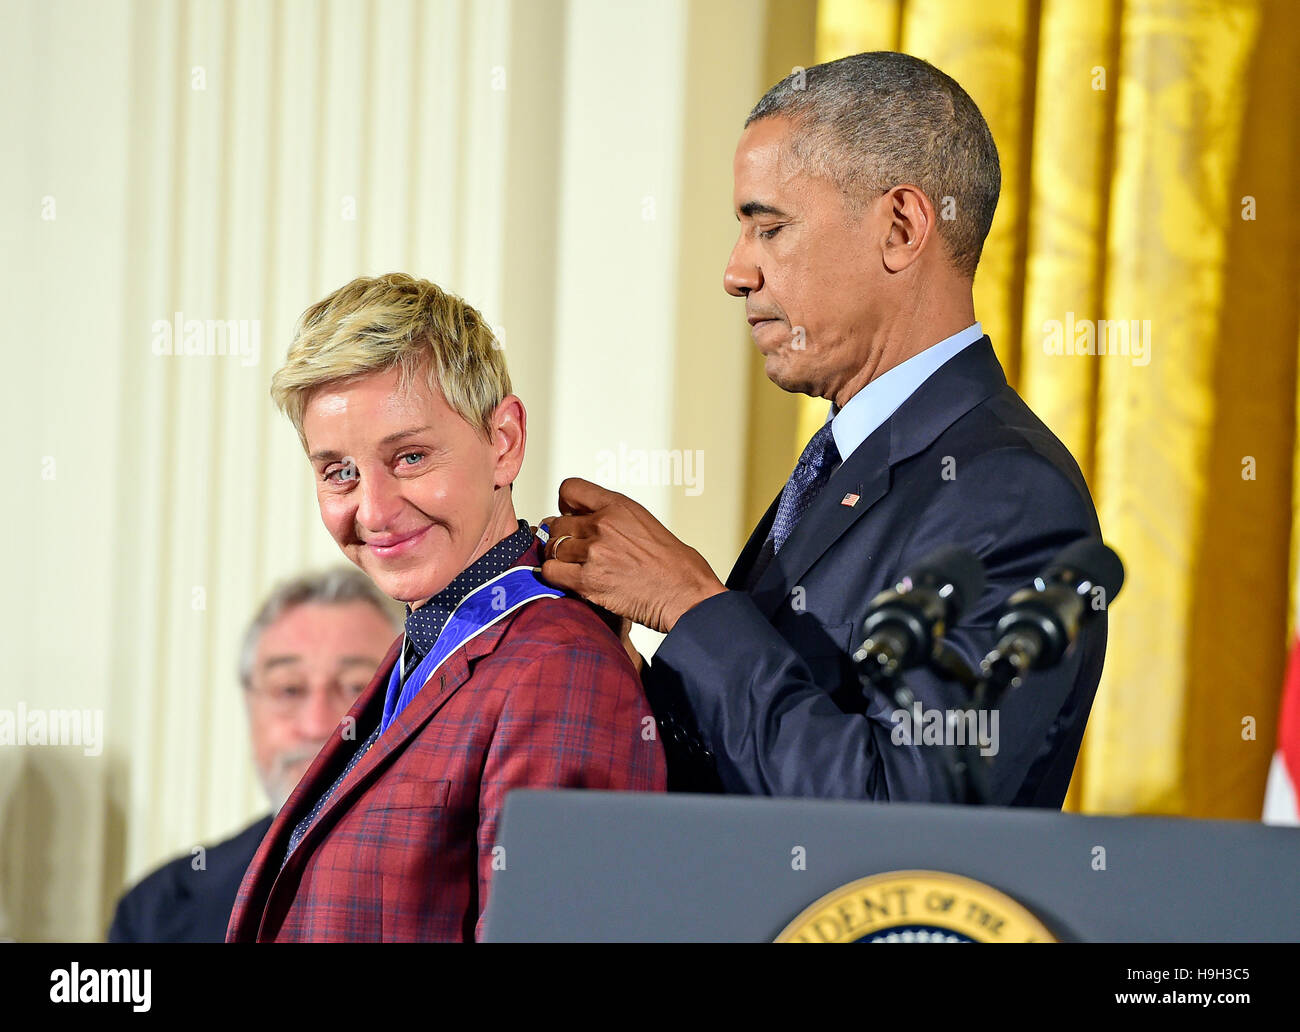 United States President Barack Obama presents the Presidential Medal of  Freedom to comedian Ellen DeGeneres during a ceremony in the East Room of  the White House in Washington, DC on Tuesday, November